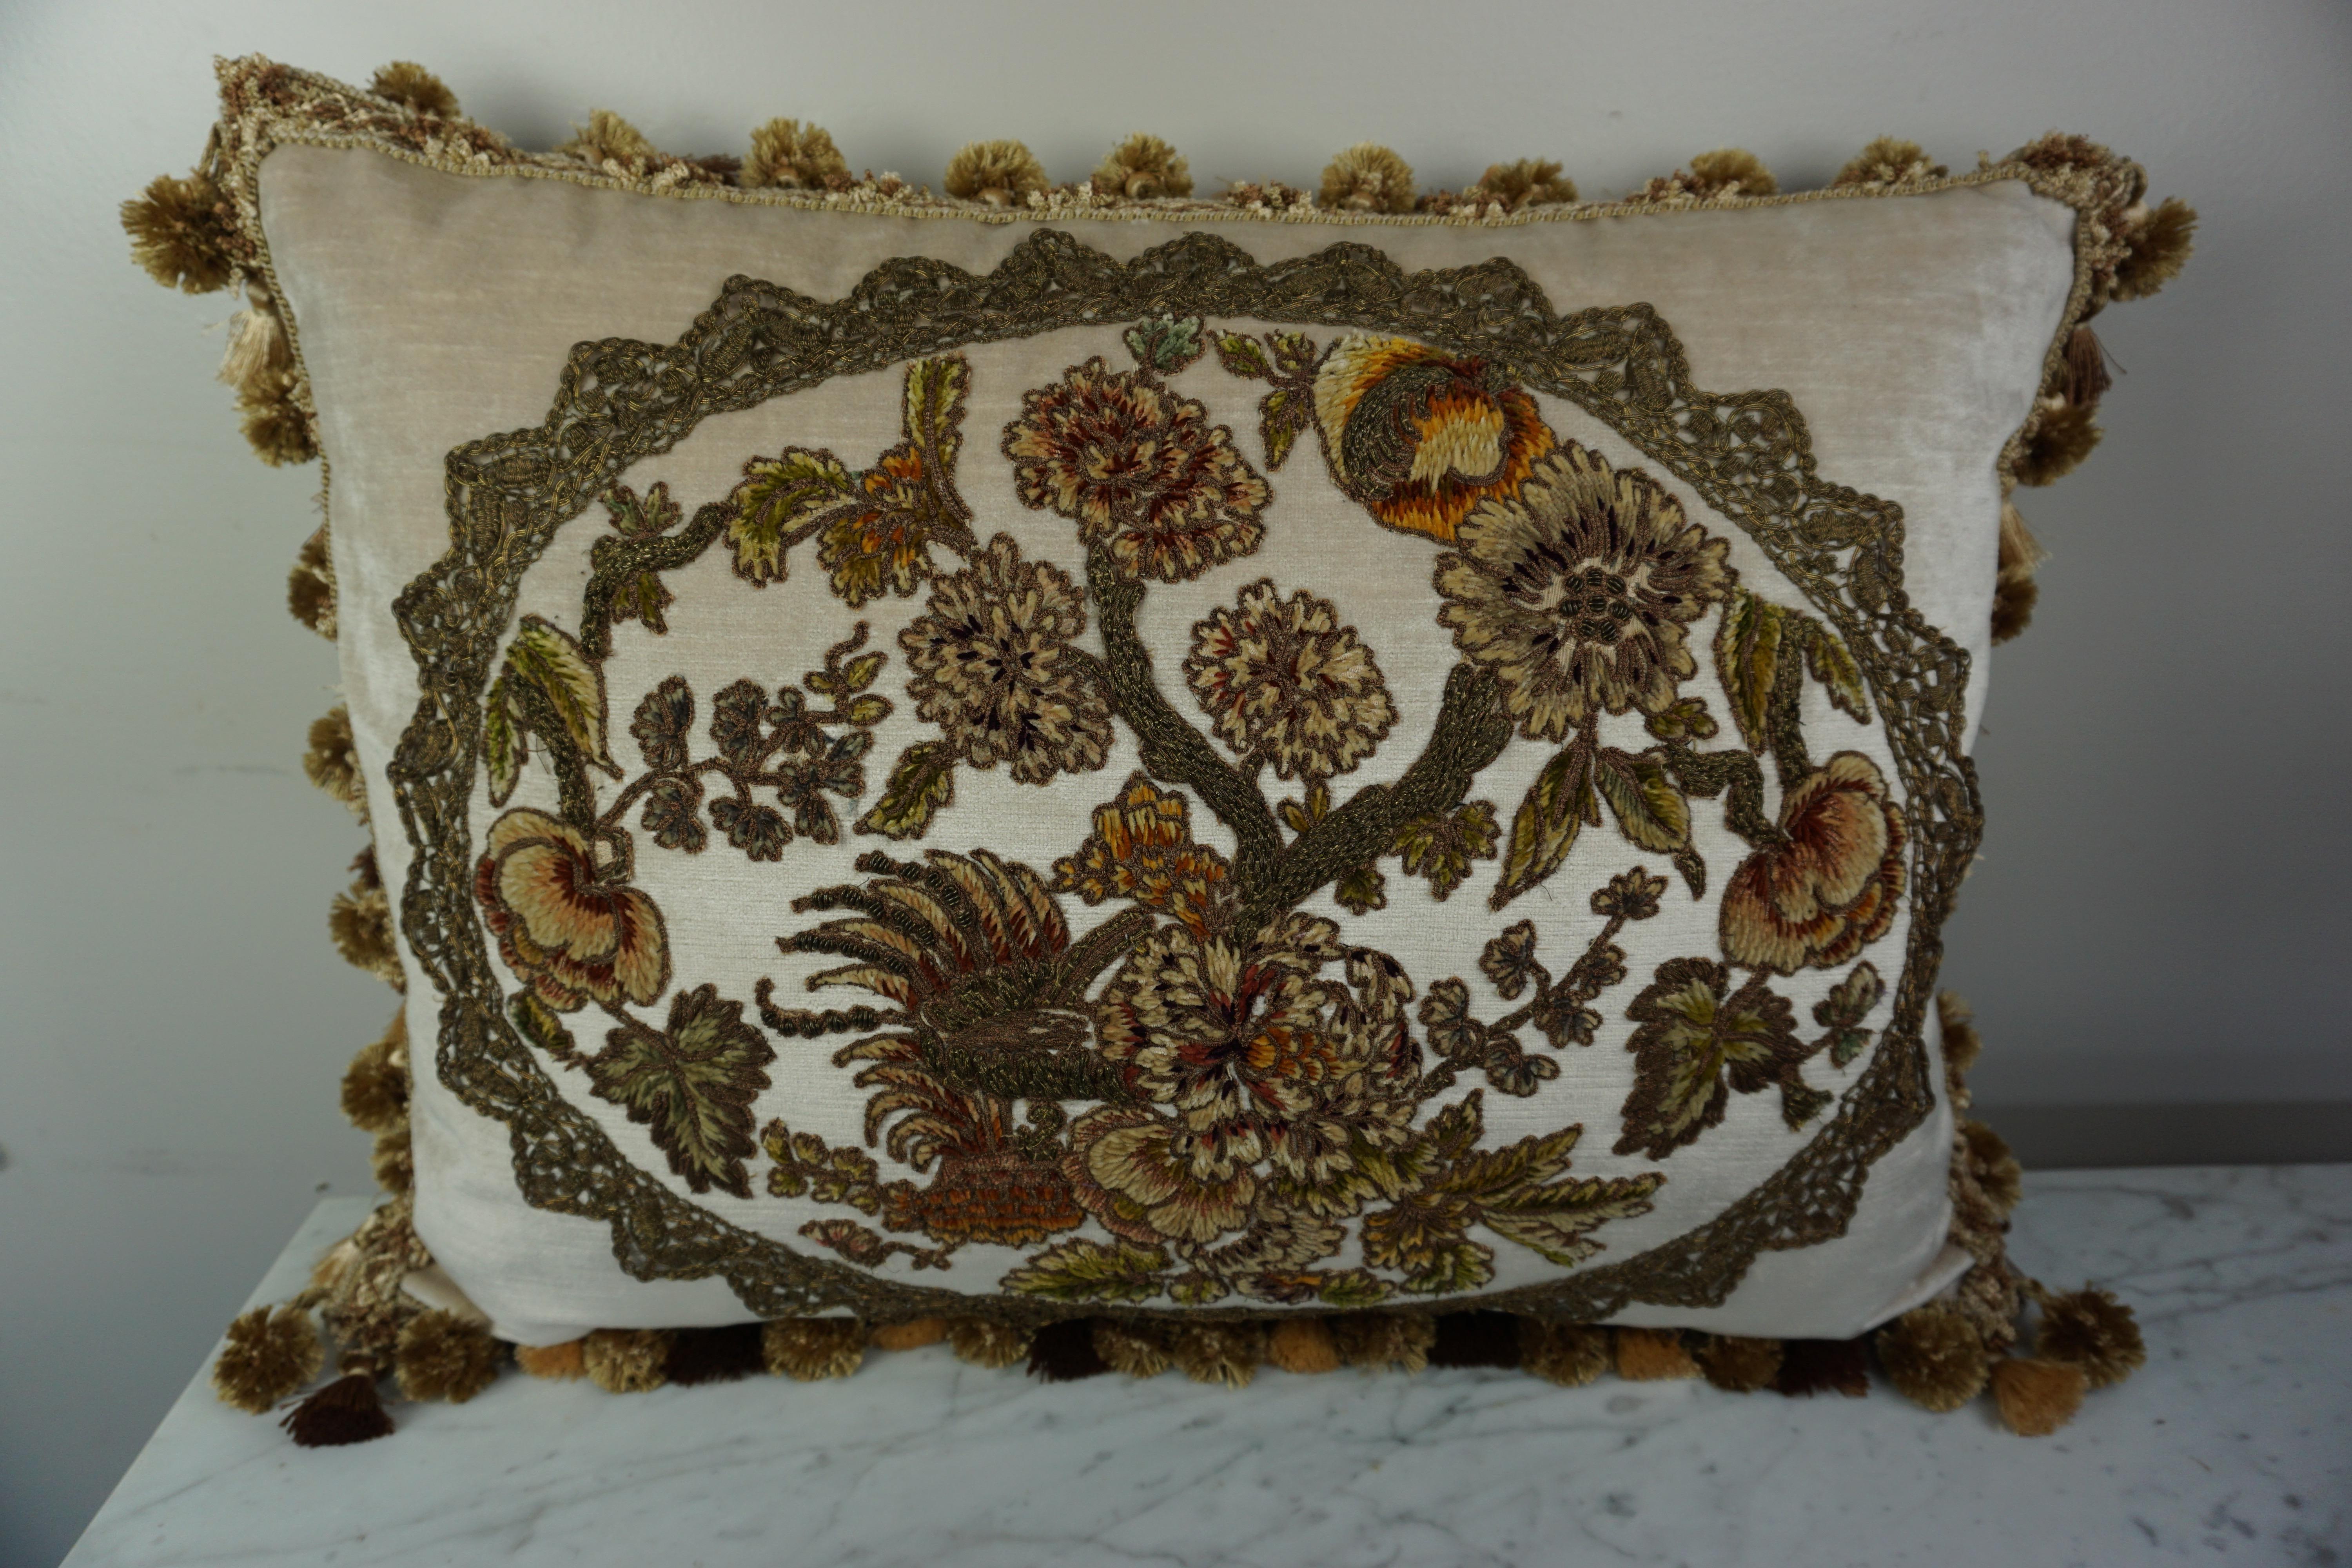 Custom pillow designed by Melissa Levinson using 19th century handmade French metallic and chenille appliques combined with contemporary velvet front and back. 19th century metallic handmade trim surrounds the antique floral applique. The pillow is